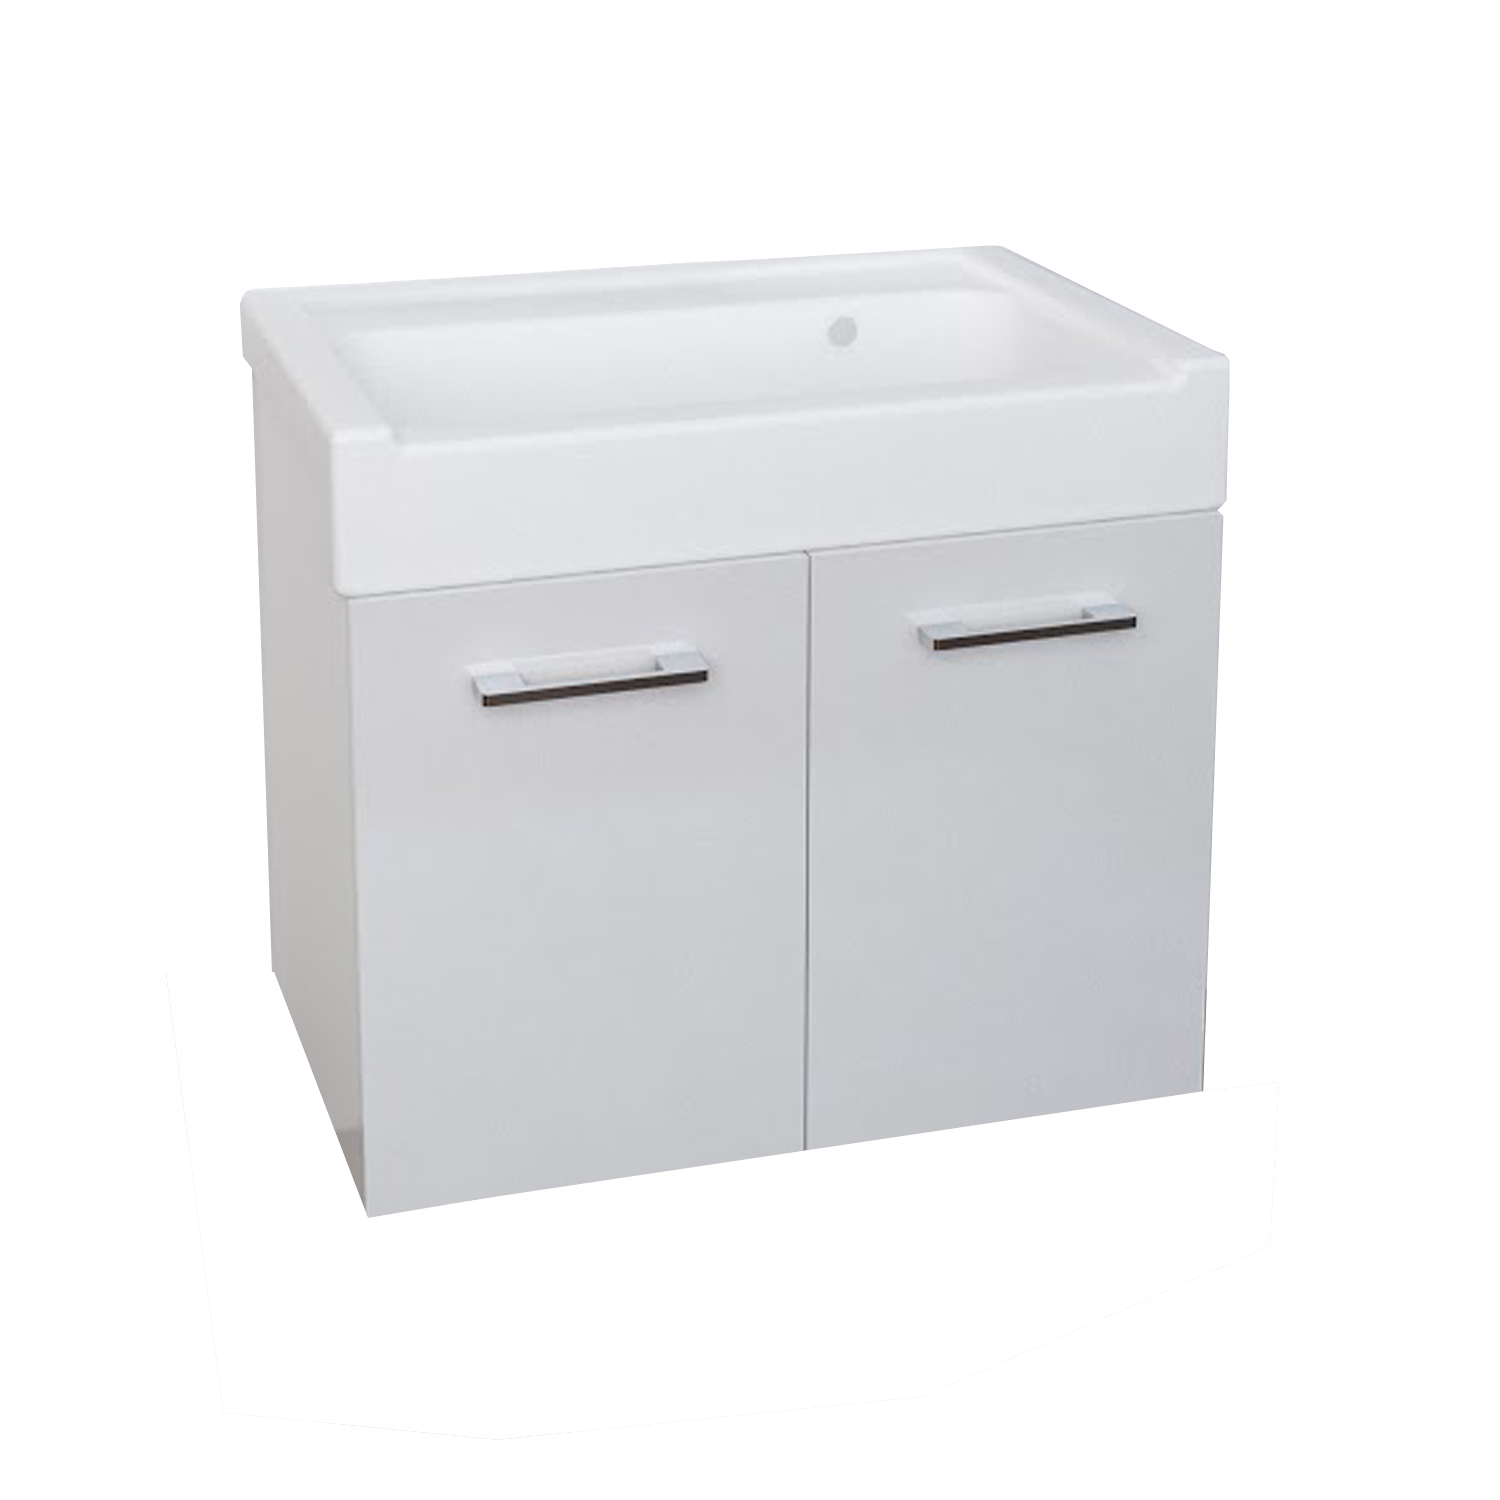 Ceramic sink with suspended cabinet, two melamine doors and